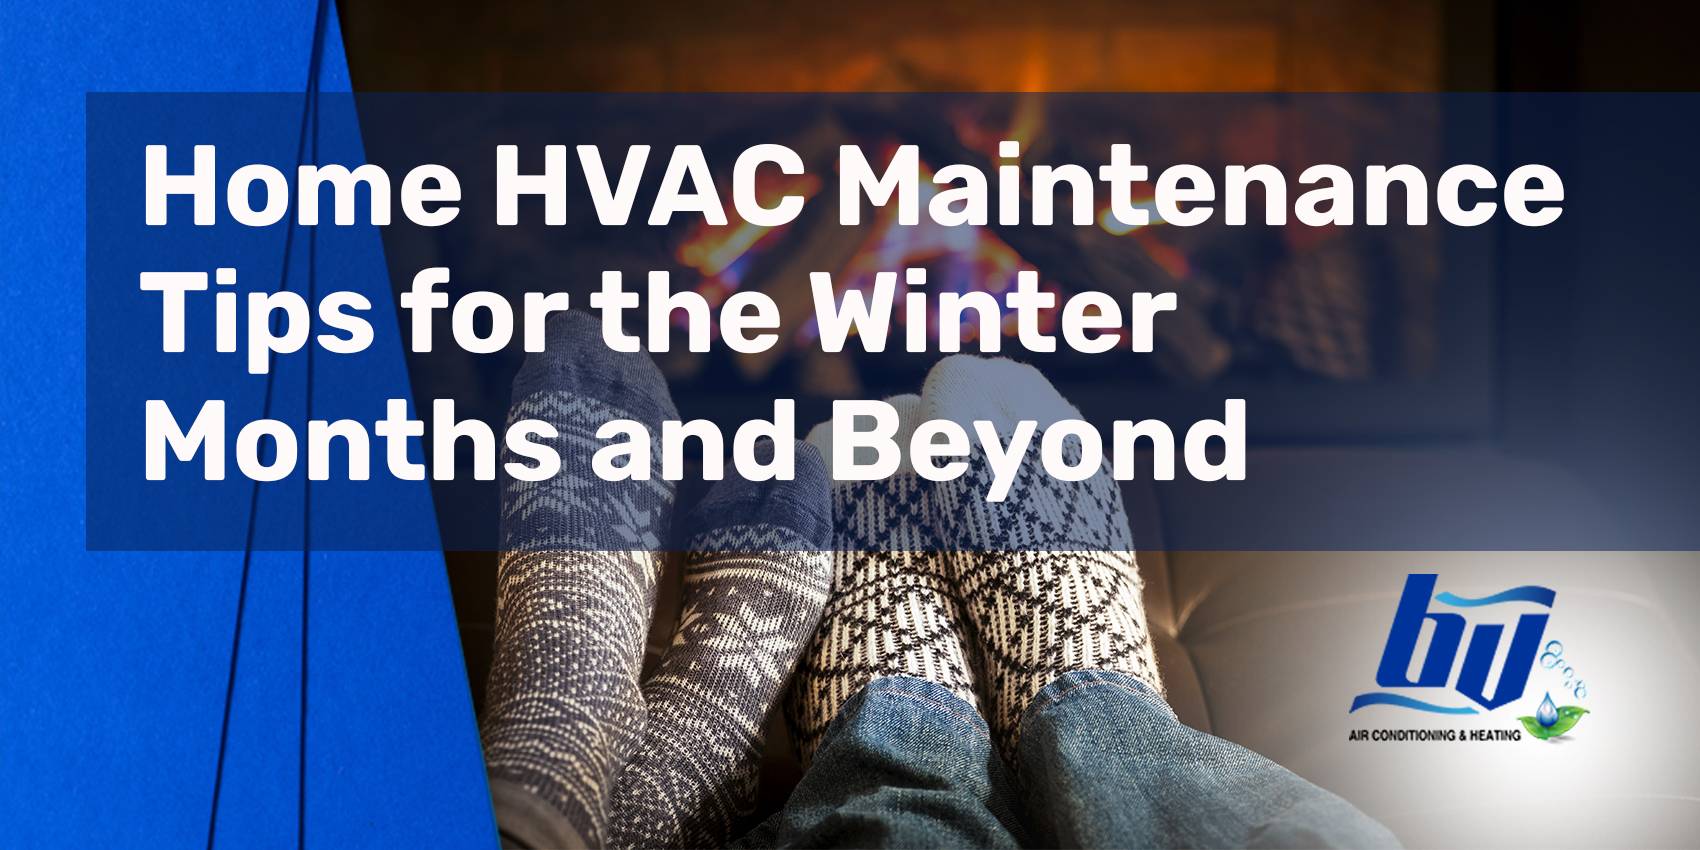 Home HVAC Maintenance Tips for the Winter Months and Beyond